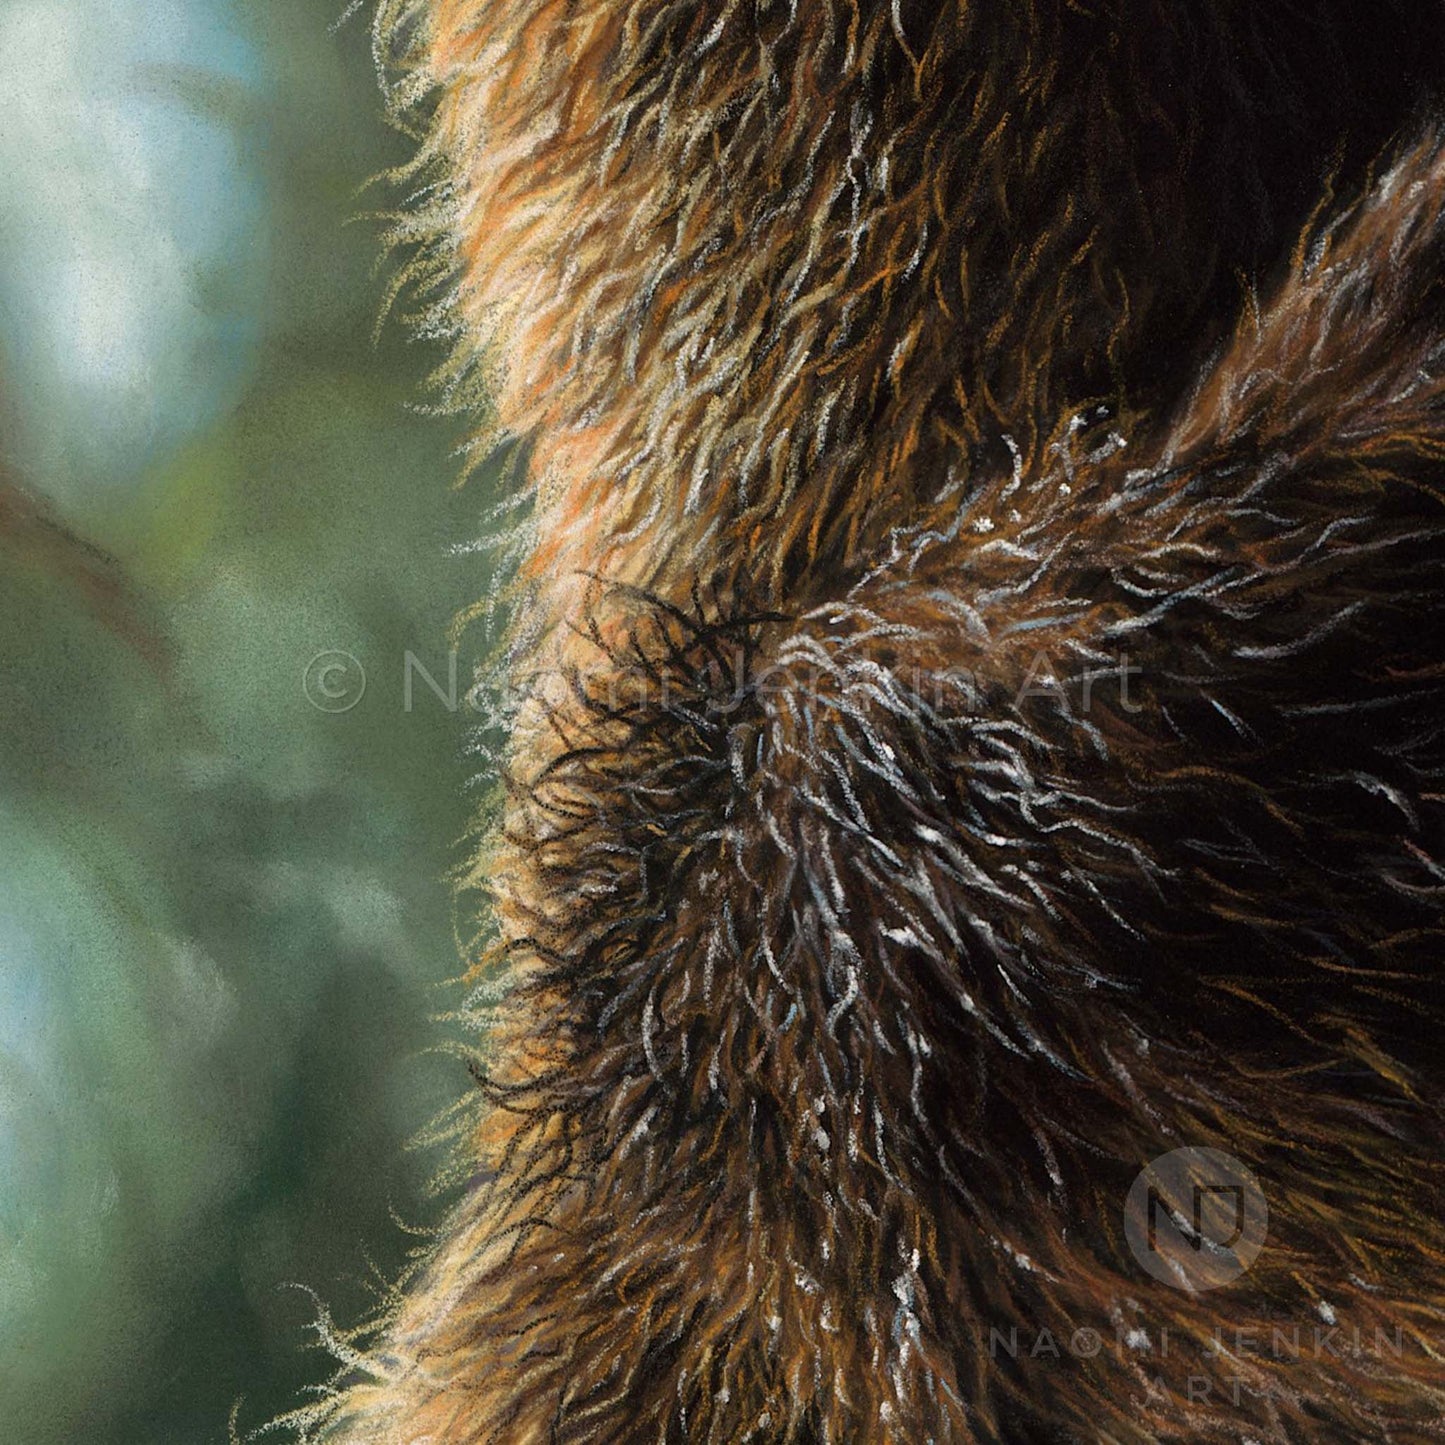 Close up drawing of a grizzly bear's fur by wildlife artist Naomi Jenkin as part of the 'Peekaboo' bear print